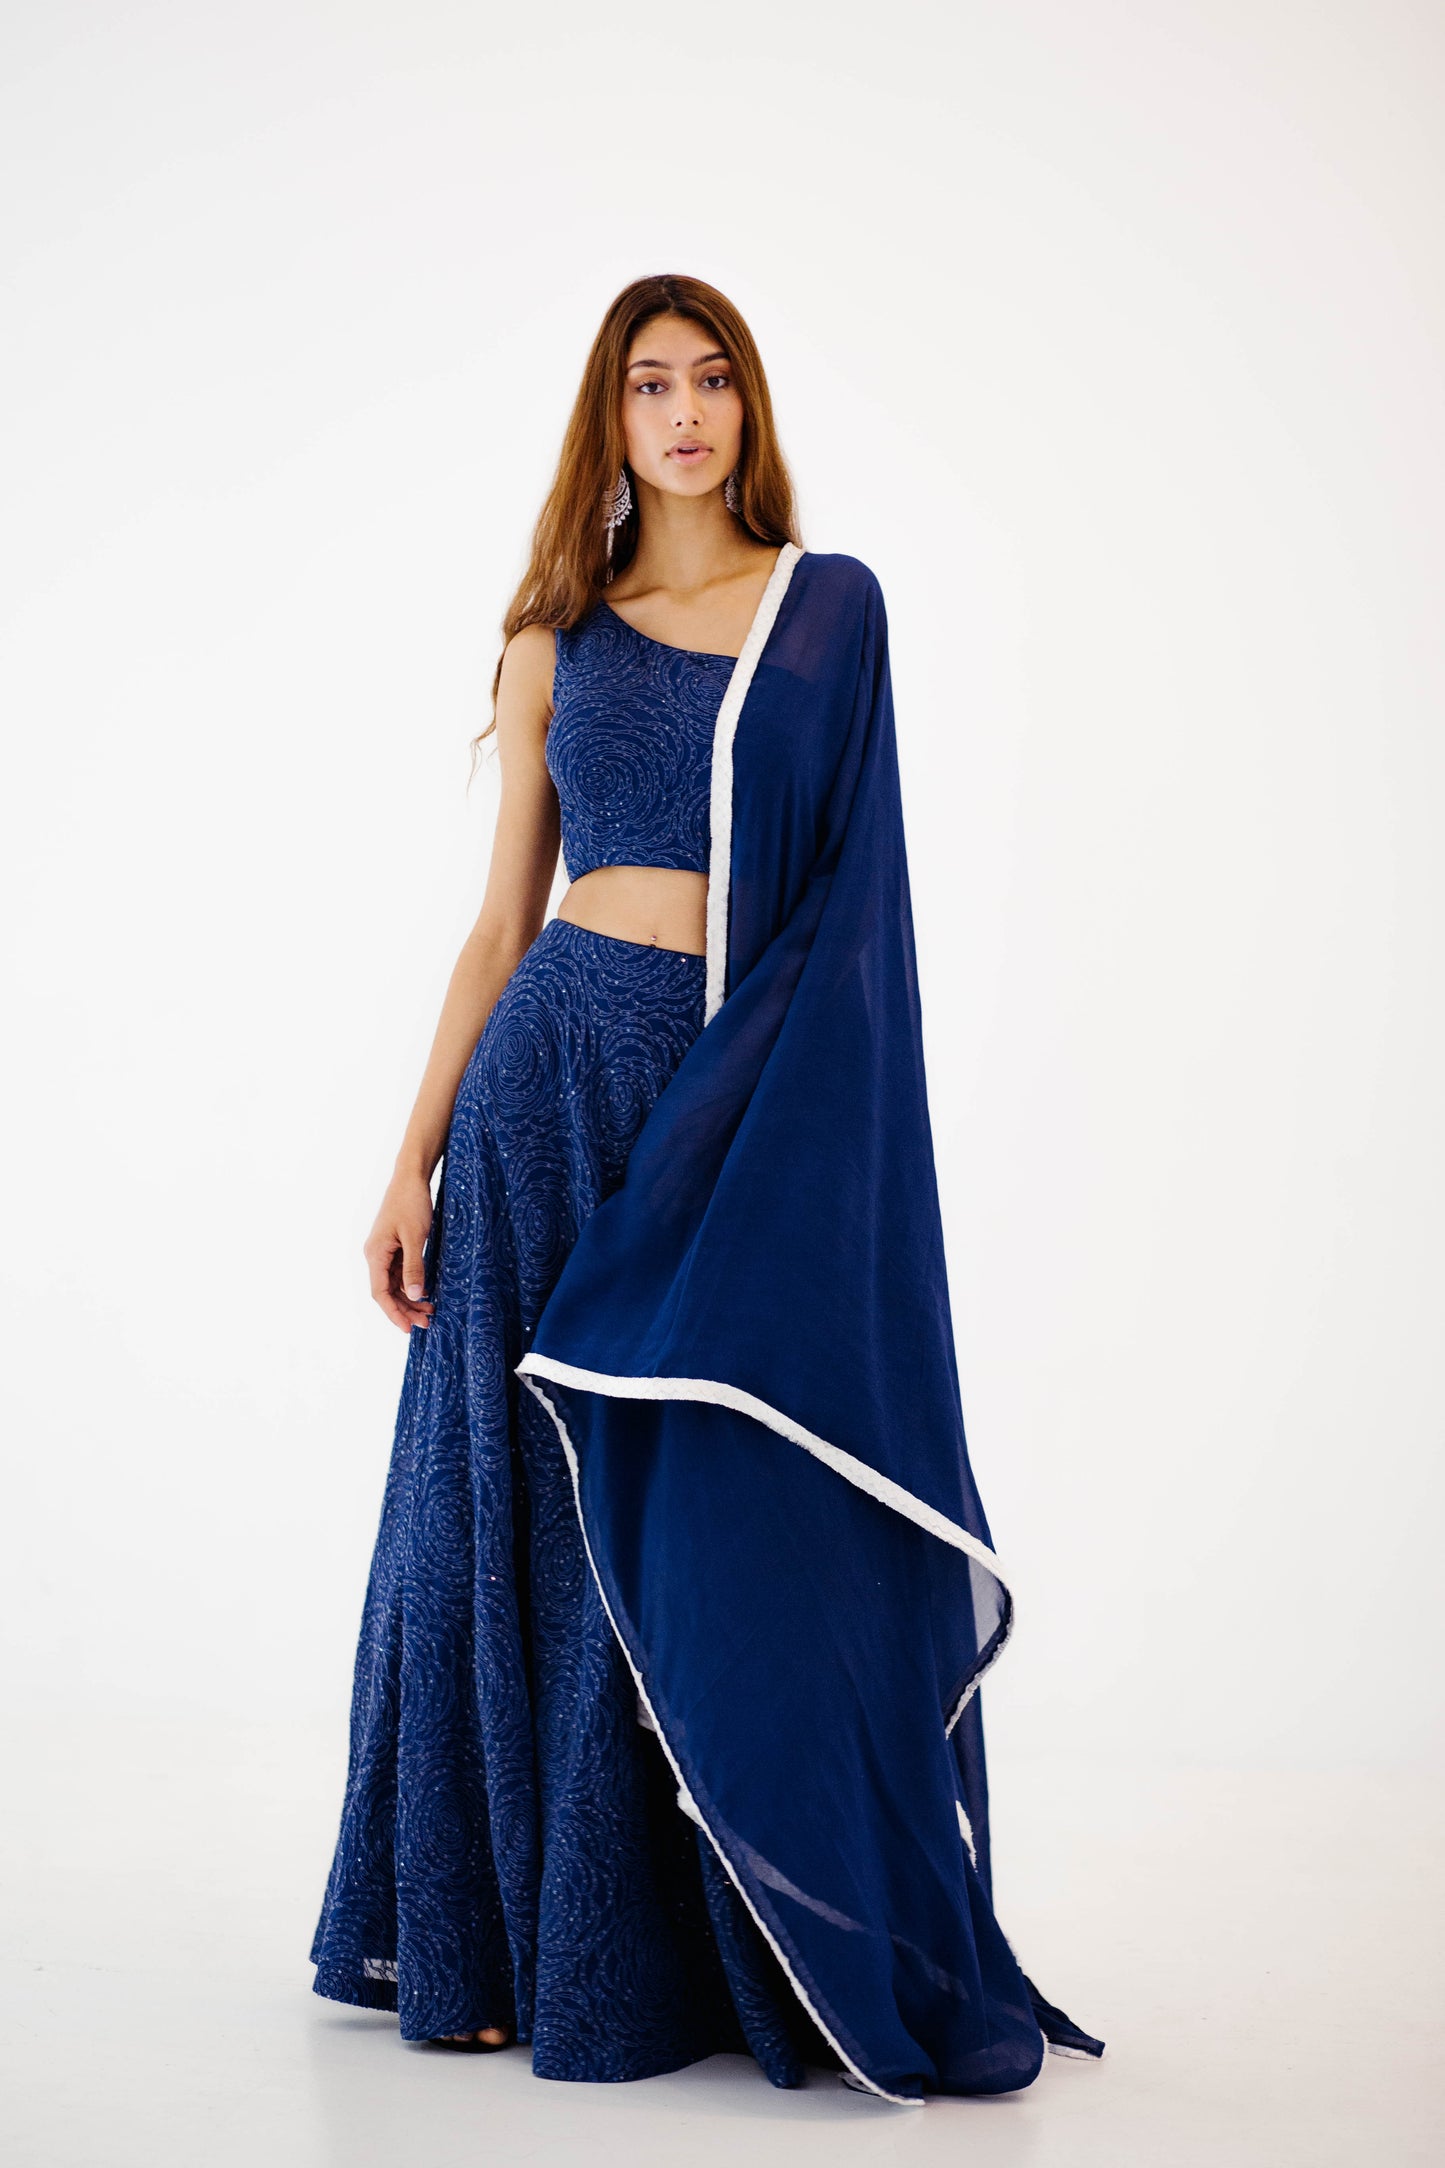 The Raz Lehenga has a dark blue georgette skirt with thread and sequin work in the shape of roses, featuring a one shoulder blouse, and is paired with a matching dupatta.